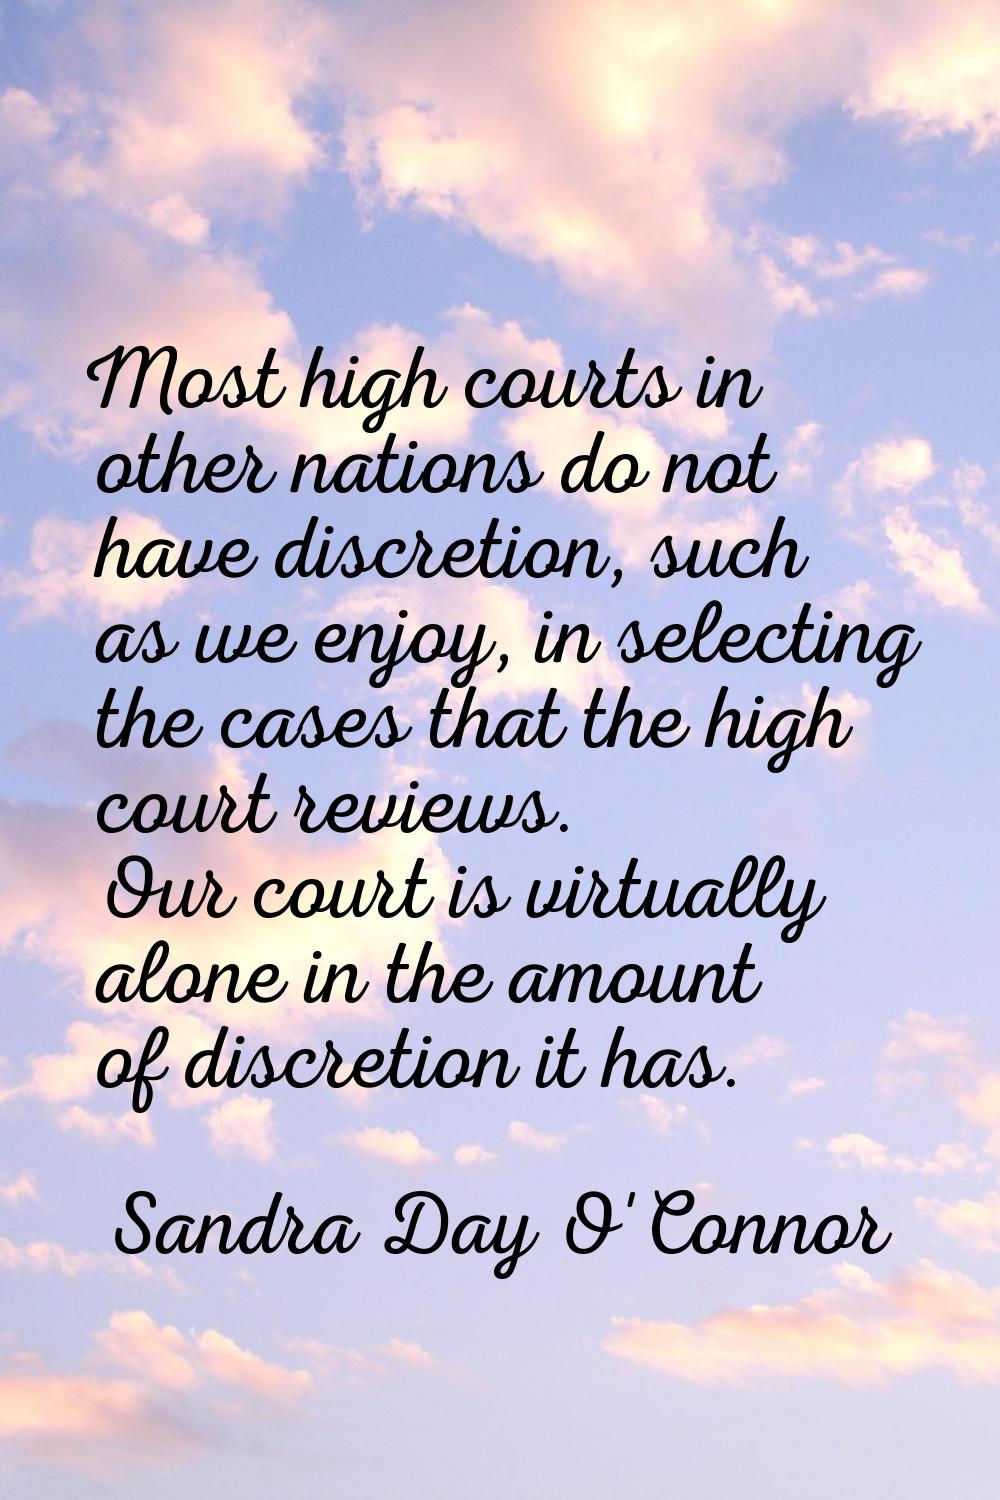 Most high courts in other nations do not have discretion, such as we enjoy, in selecting the cases 